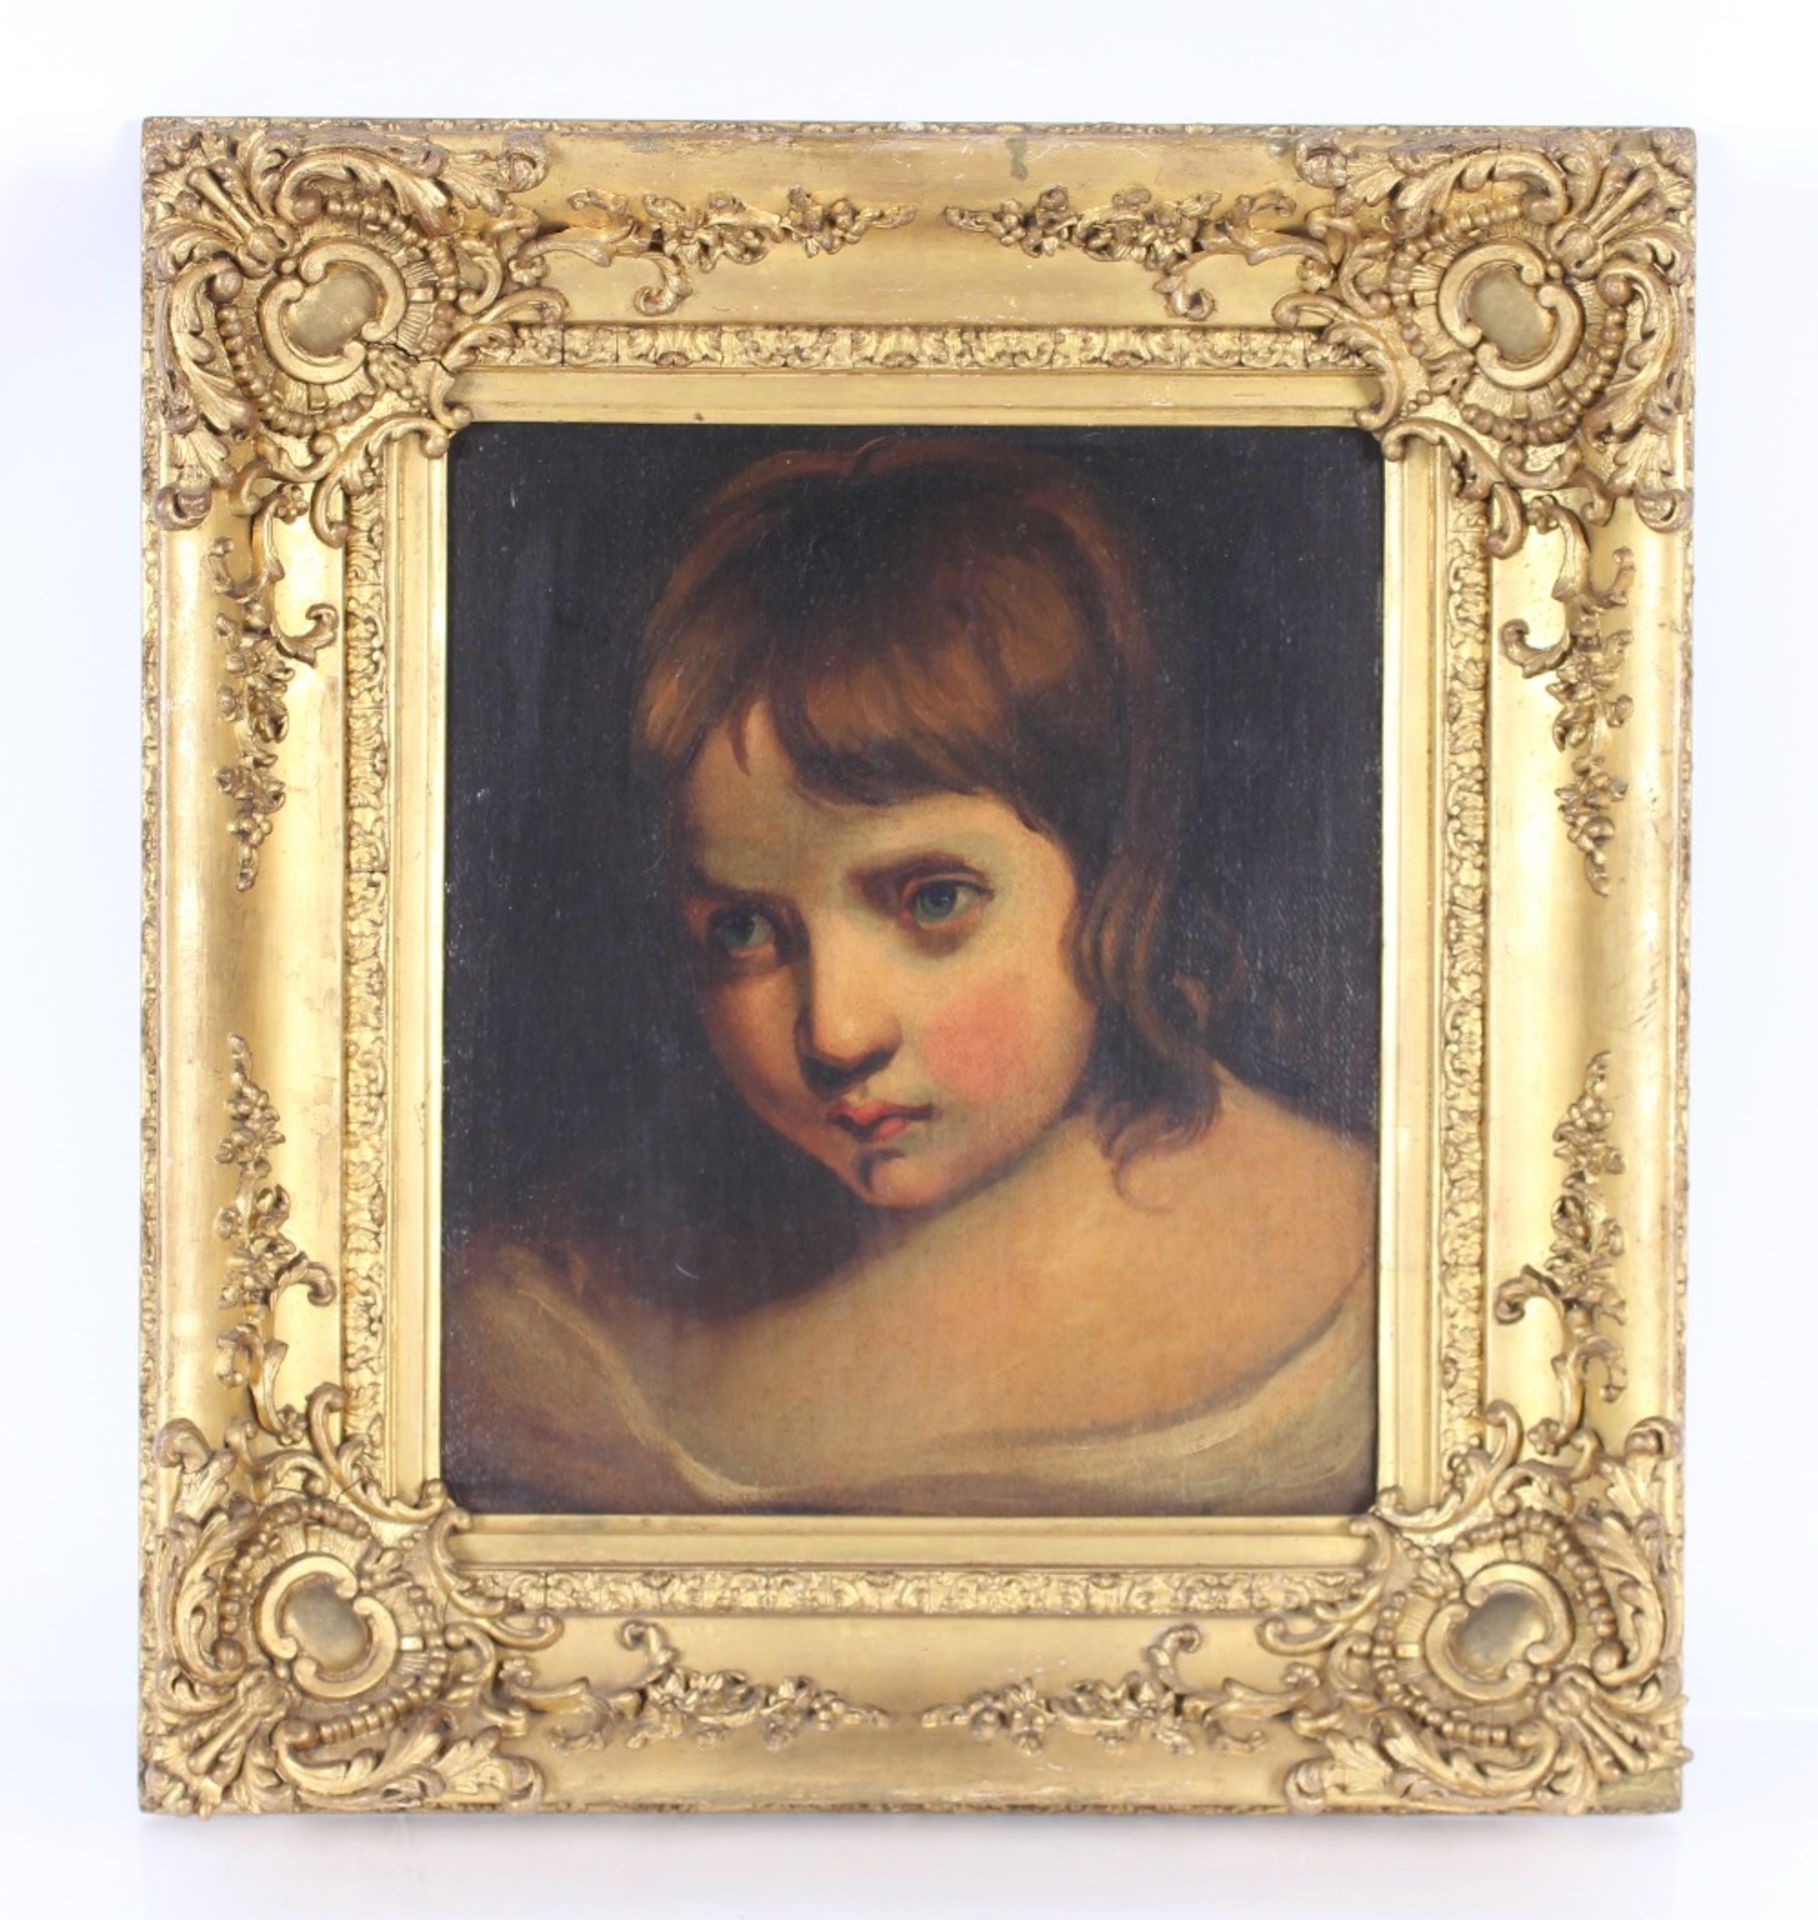 Attributed to J. Opie R.A., head and shoulders por